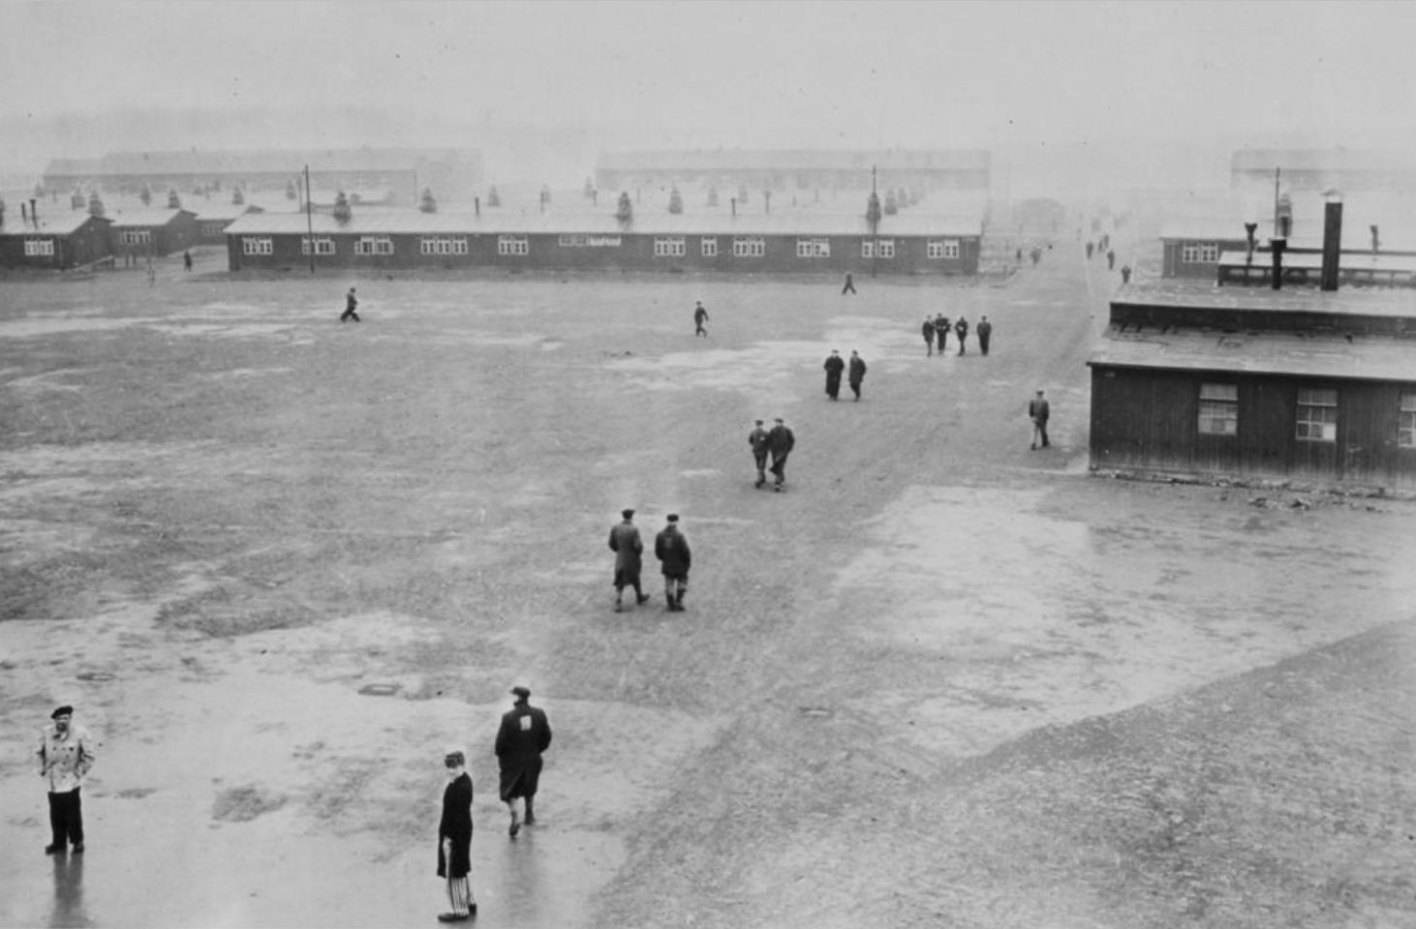 View from the tower of the gate building over the roll call area and the barracks in northern direction. The rear area of the camp disappears in the fog. In the large open area, people can be seen walking around alone or in small groups.